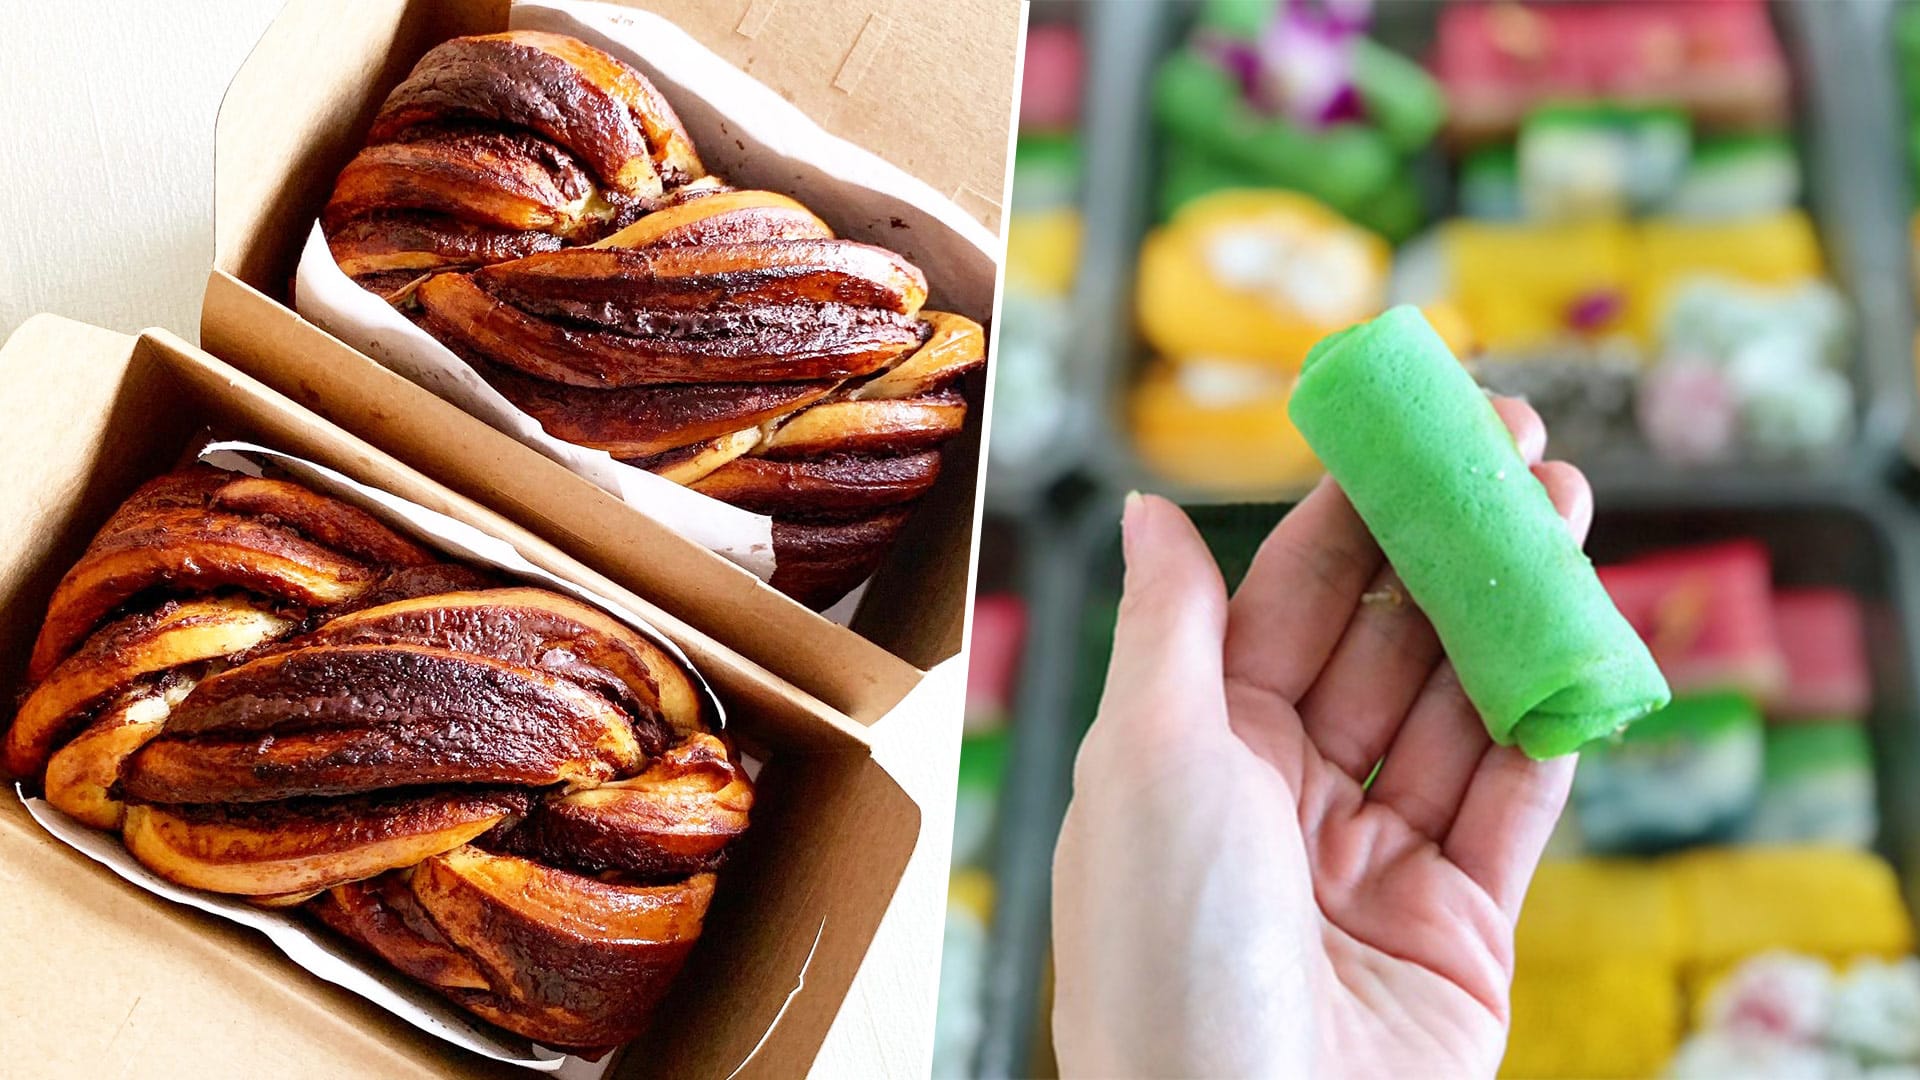 Worthy Makan Gifts Like Kueh Dadar & Nutella Babka From Home-Based Businesses For X’mas